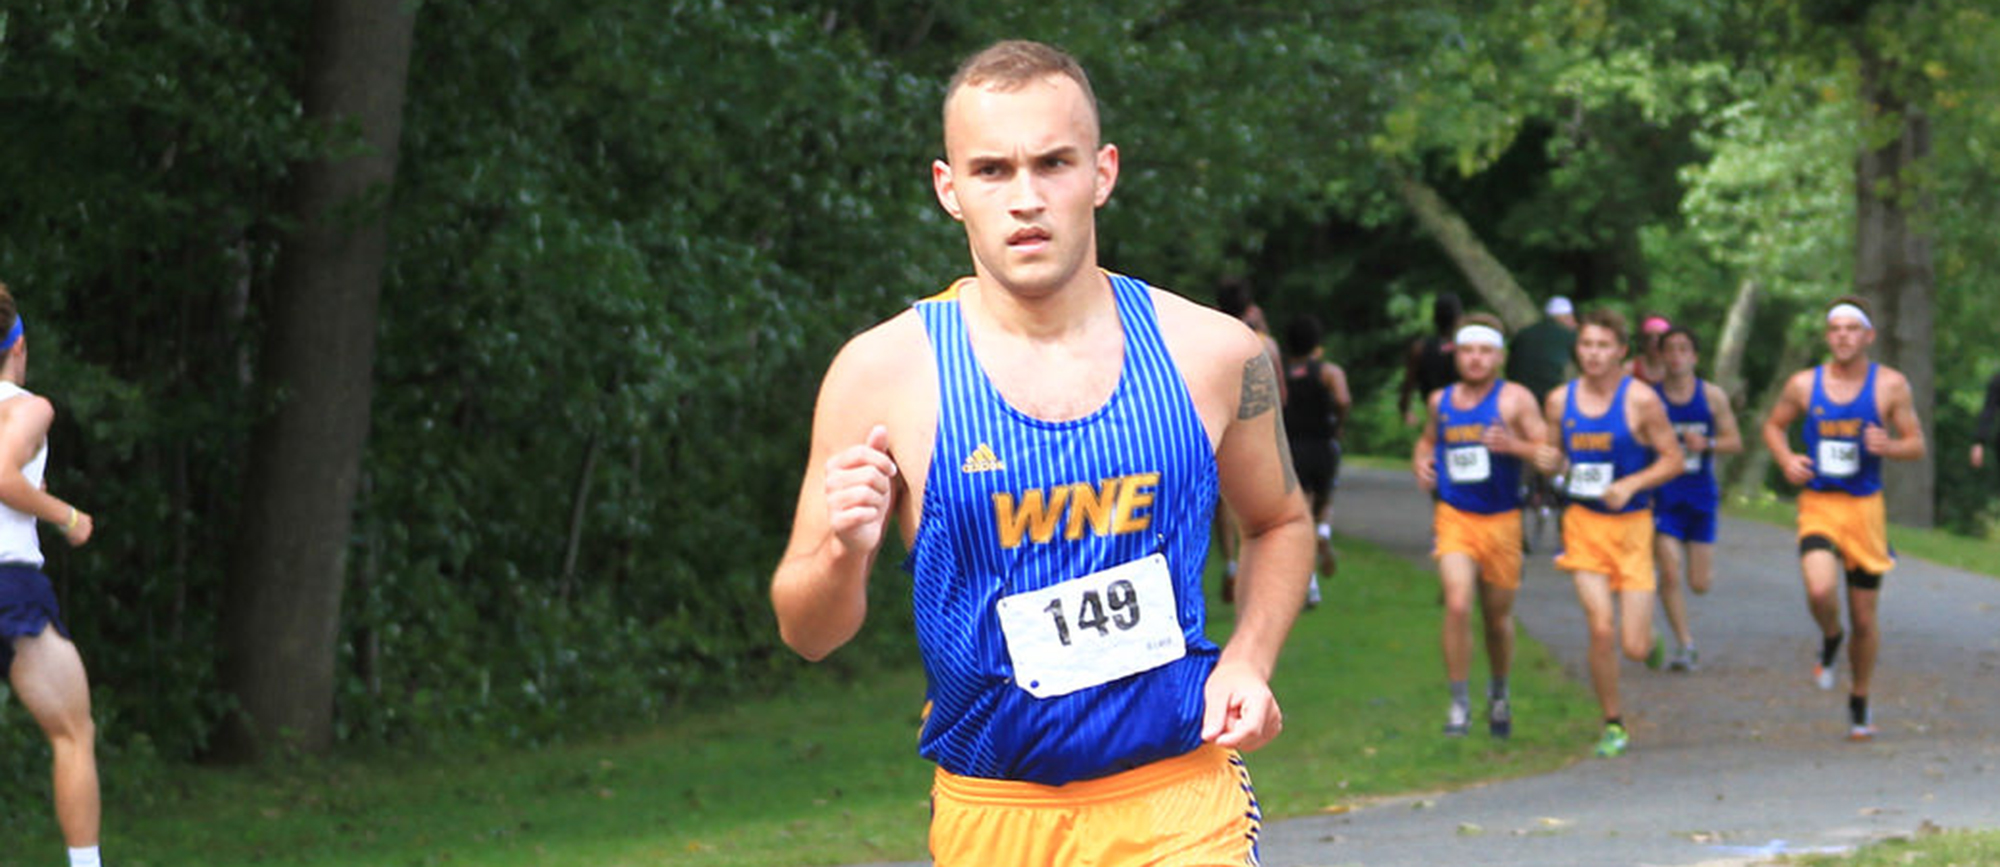 Senior Nico Gallo was Western New England's top finisher at the James Earley Invitational on Saturday, as he placed 93rd with a time of 29:10.18.